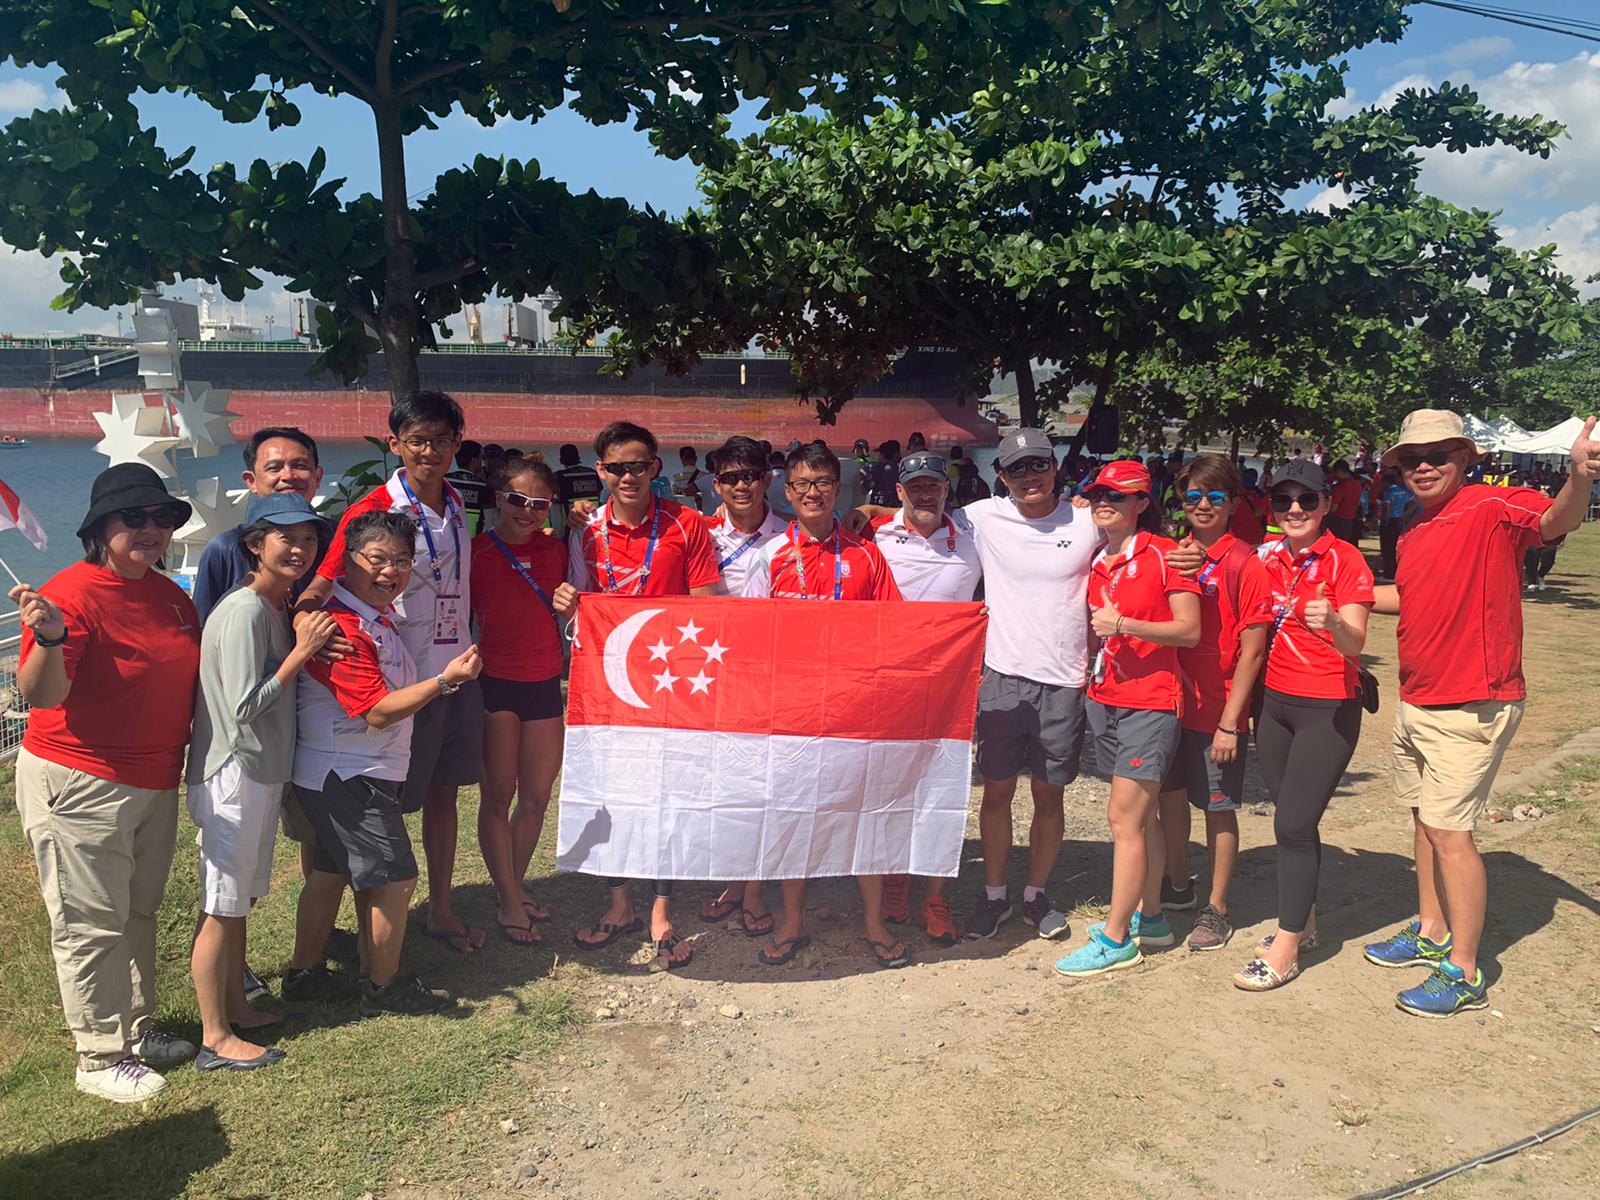 “Together we fought hard, we learned for the future, and we became stronger” Team Singapore Canoeing at the 2019 SEA Games